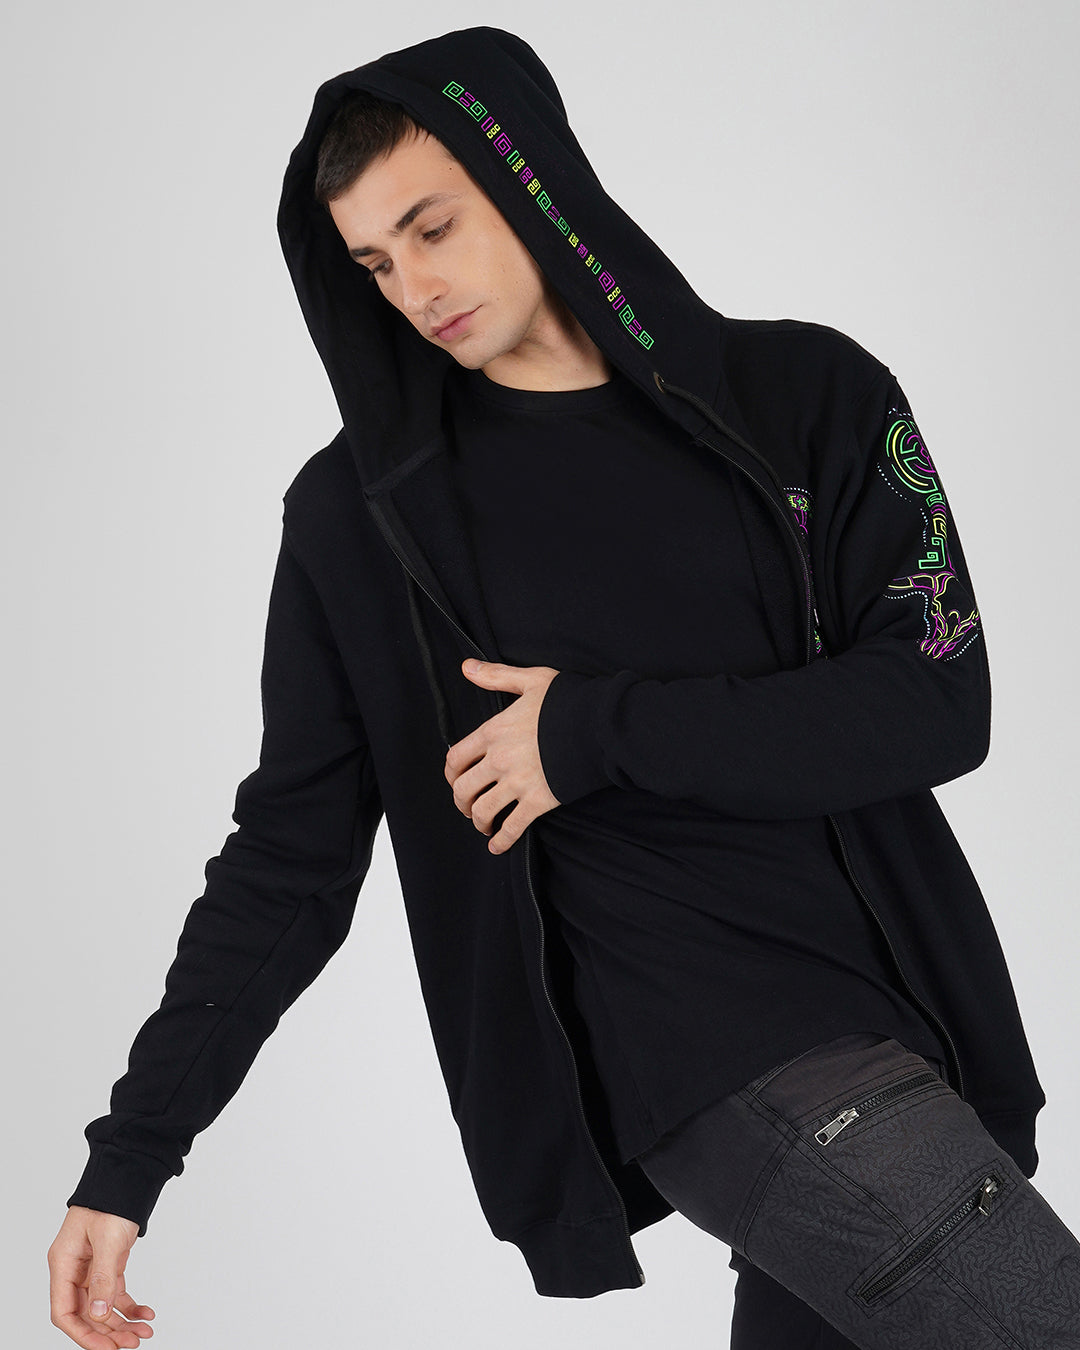 Ayahuasca UV Light Reactive Psychedelic Cotton Hoodie